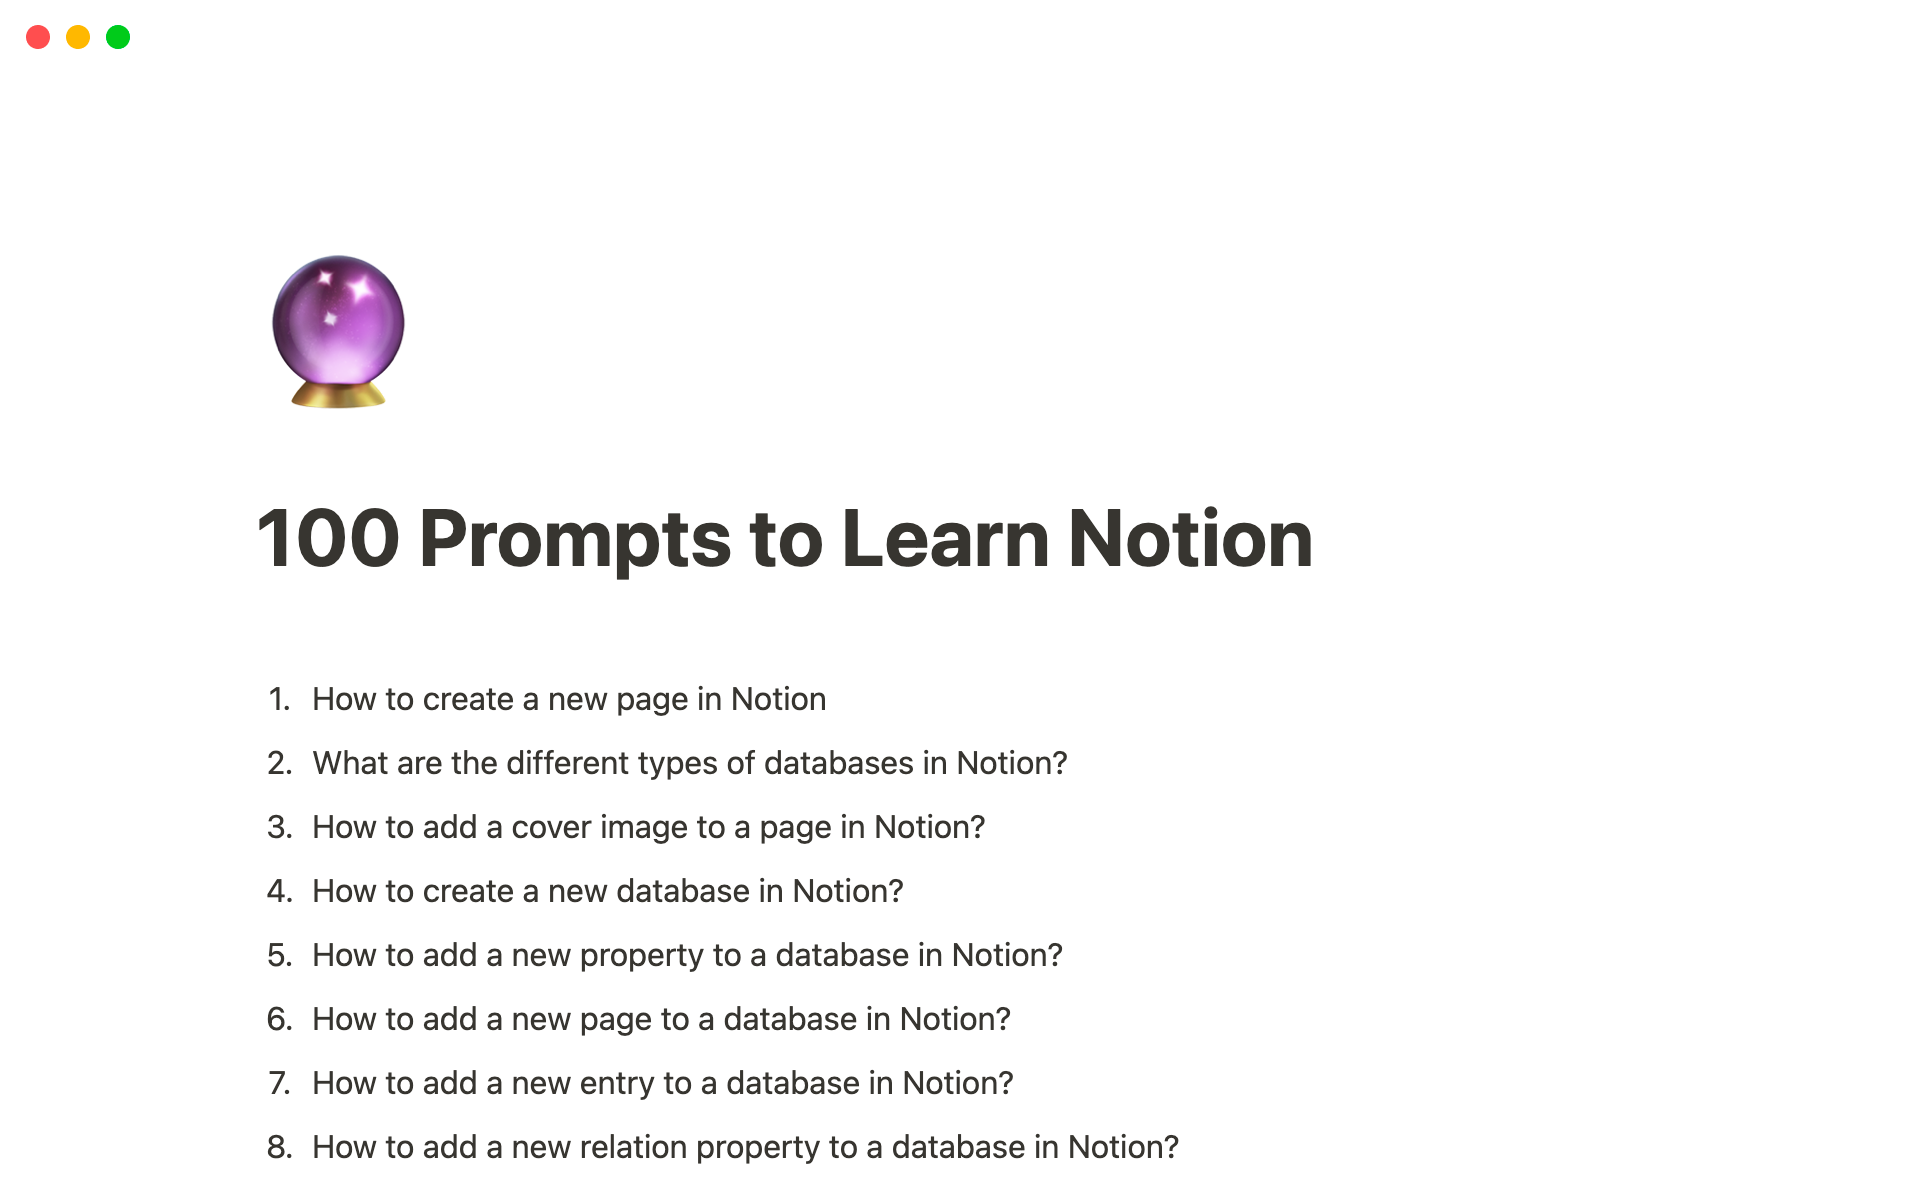 100 AI prompts to help master Notion.